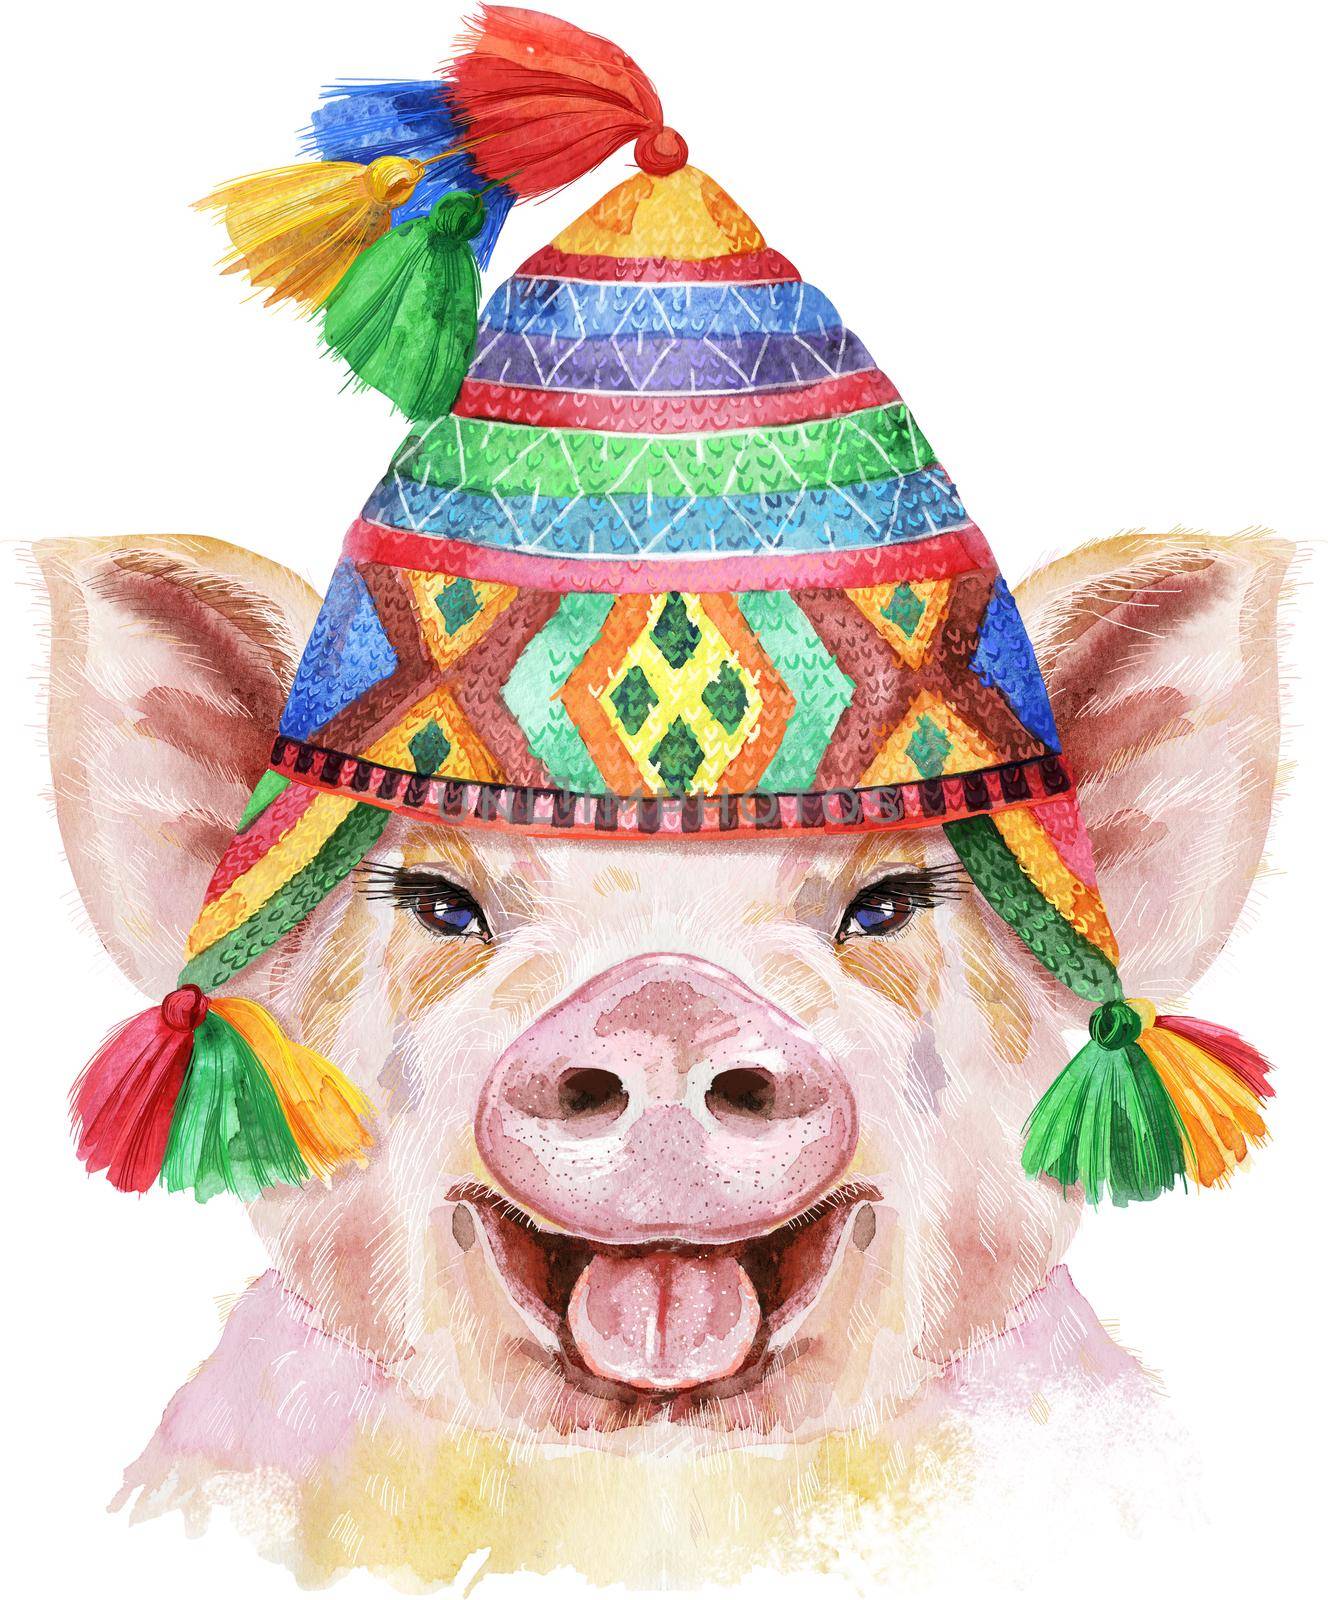 Watercolor portrait of pig in chullo hat by NataOmsk